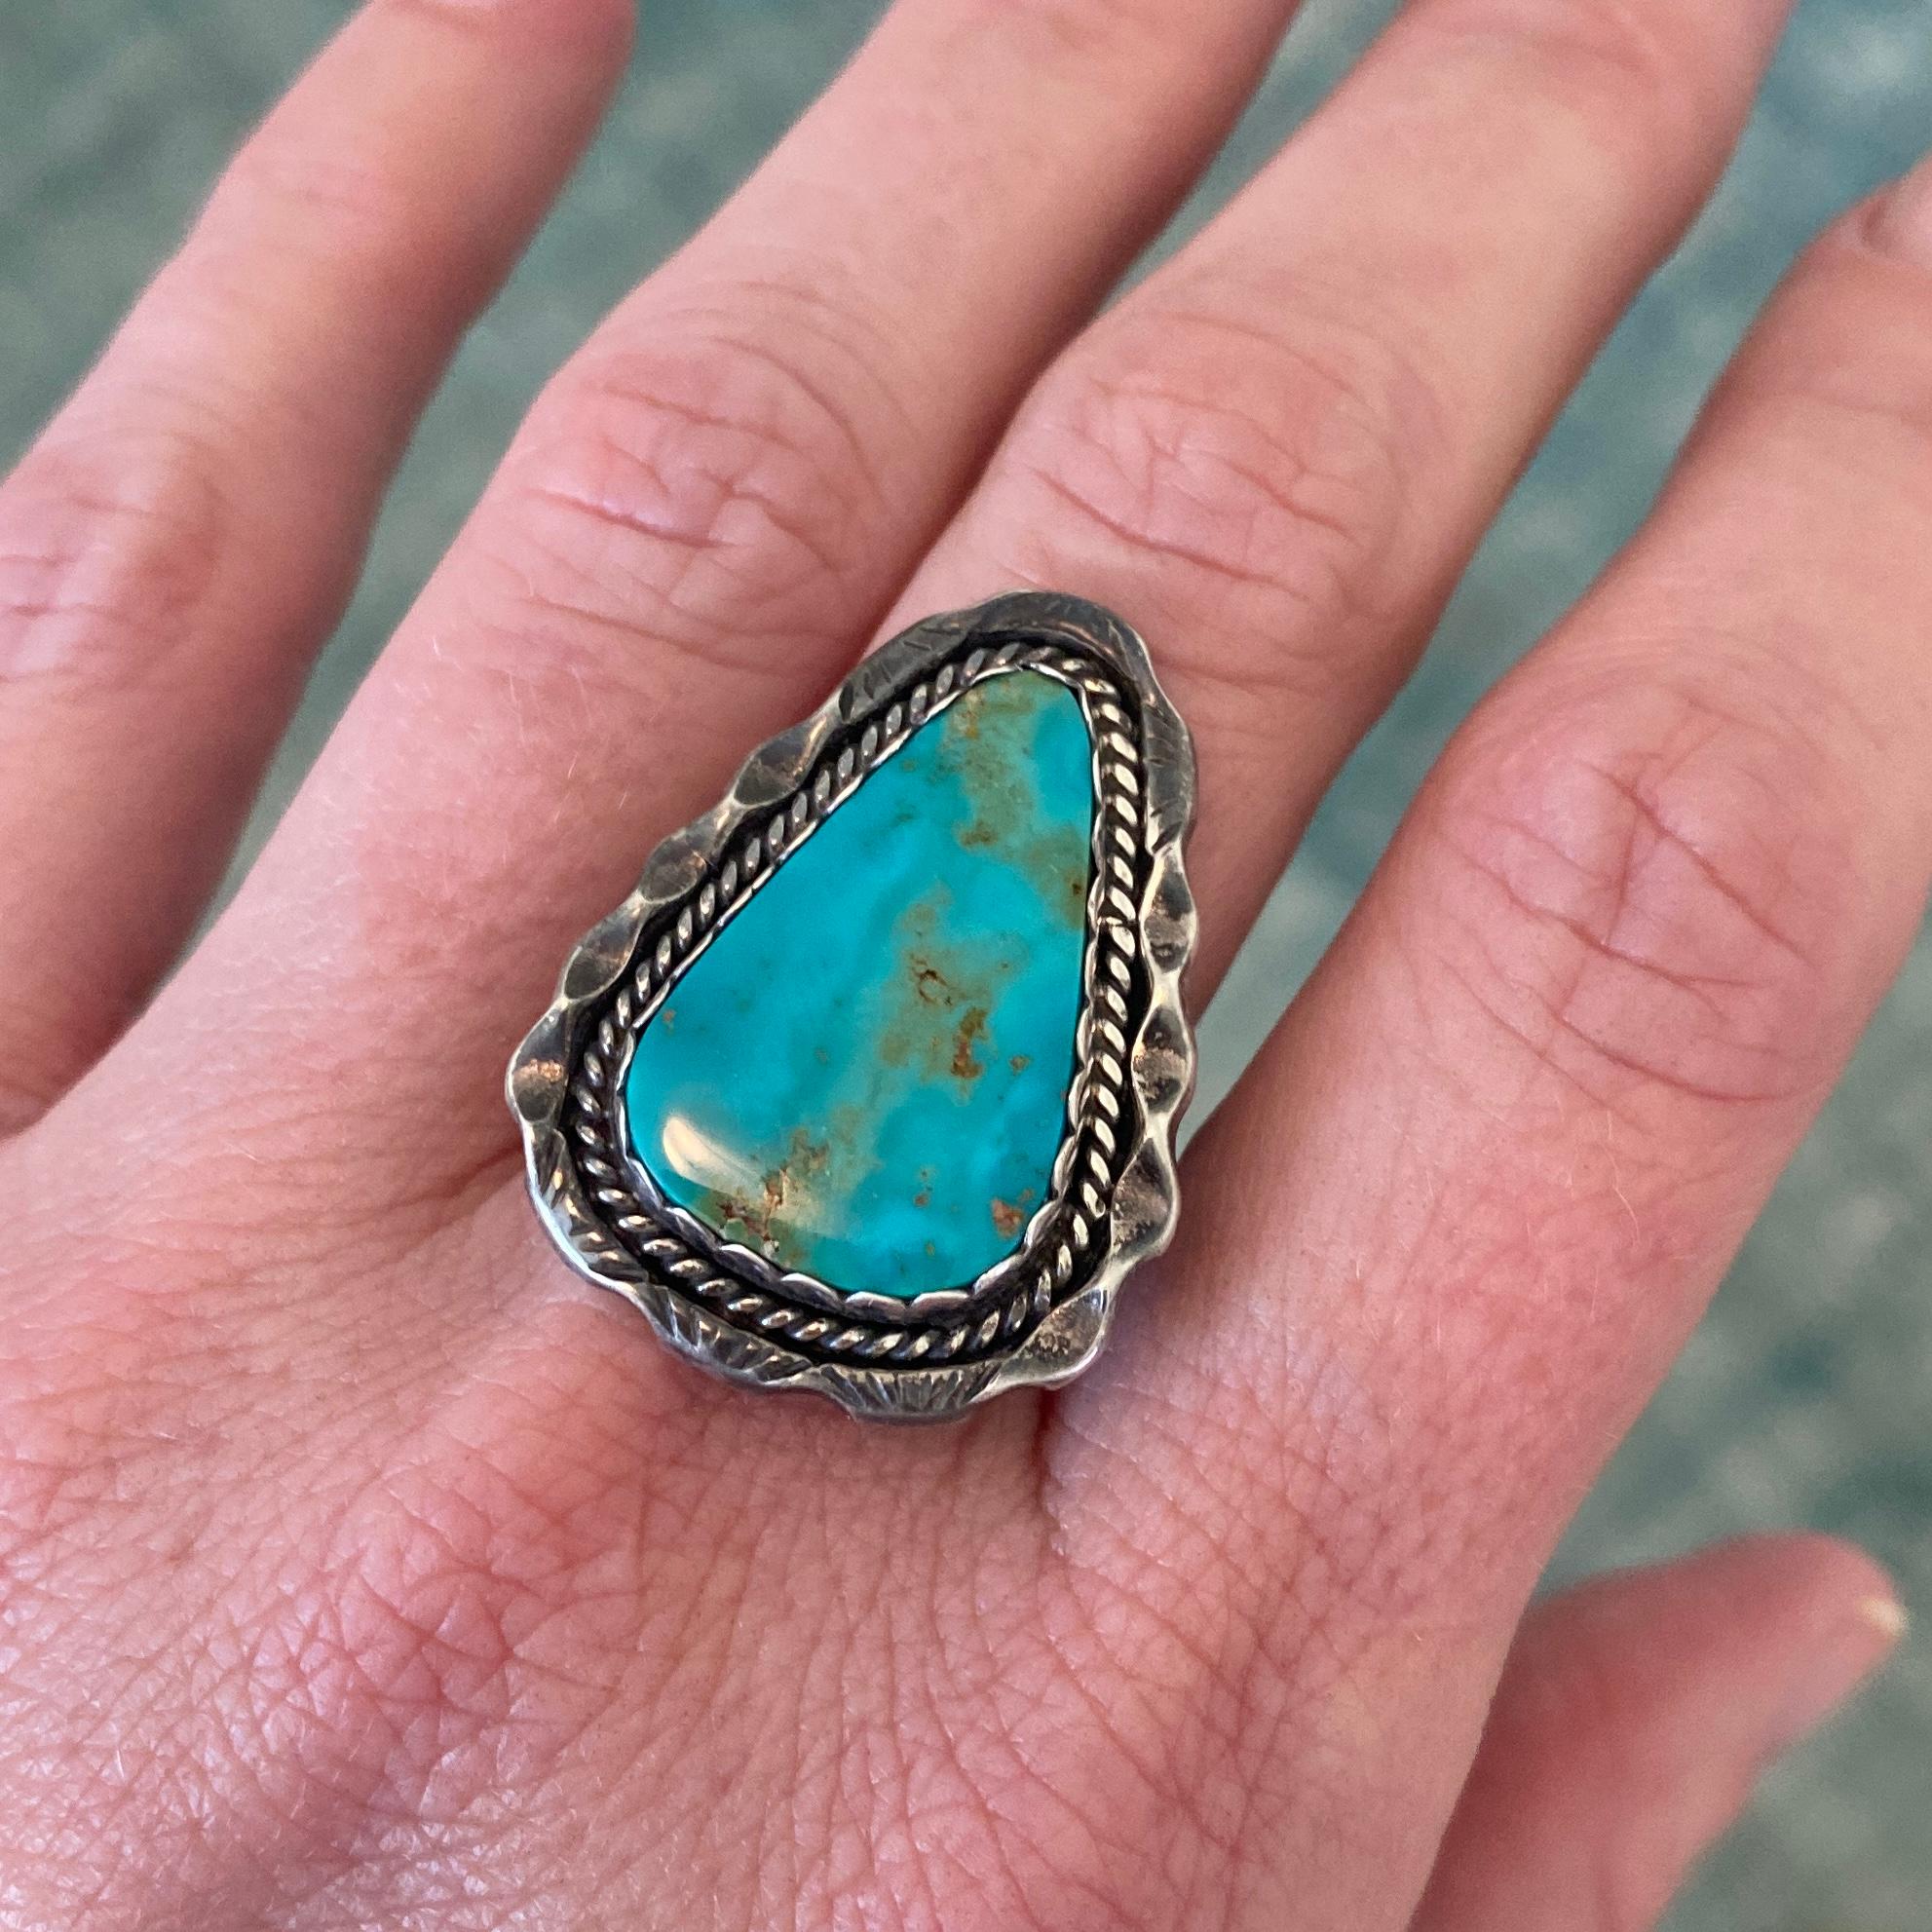 Turquoise Arrowhead Shaped Smooth Cabochon Textured Statement Sterling Ring 2